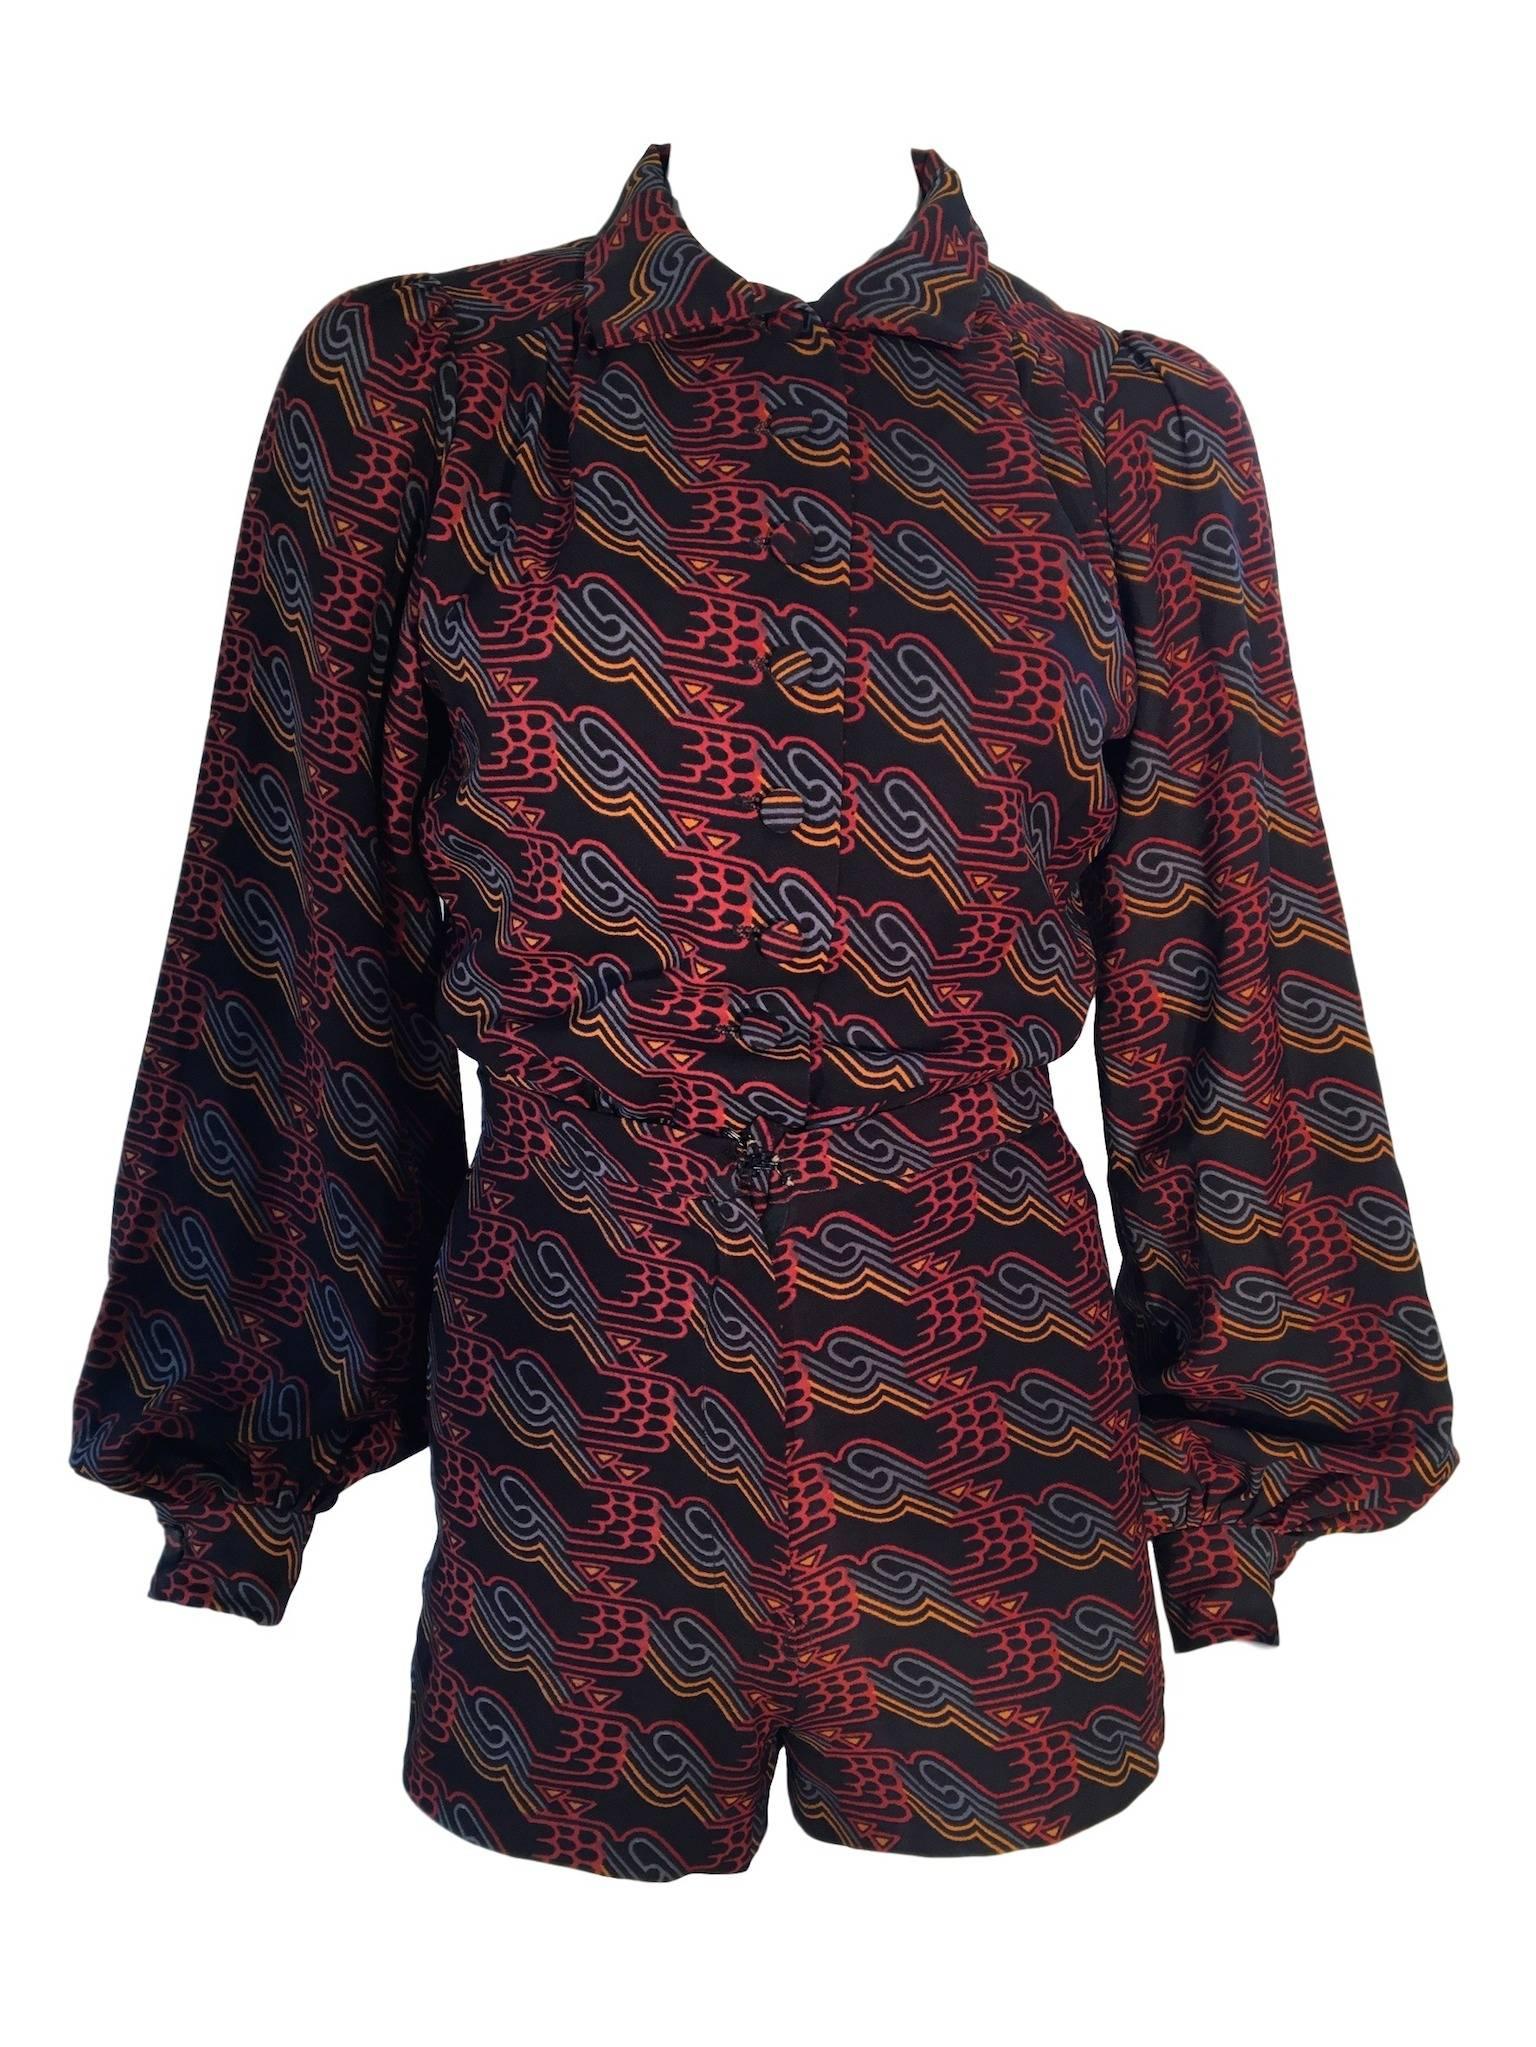 Vintage 1970s Lee Bender at Bus Stop moss crepe material with deco print top and hot pants set. Button front blouse with poet sleeves, high waisted hot pants that fasten at the front with a zip. 

Size UK 8 Measuring 18 inches across chest and 23